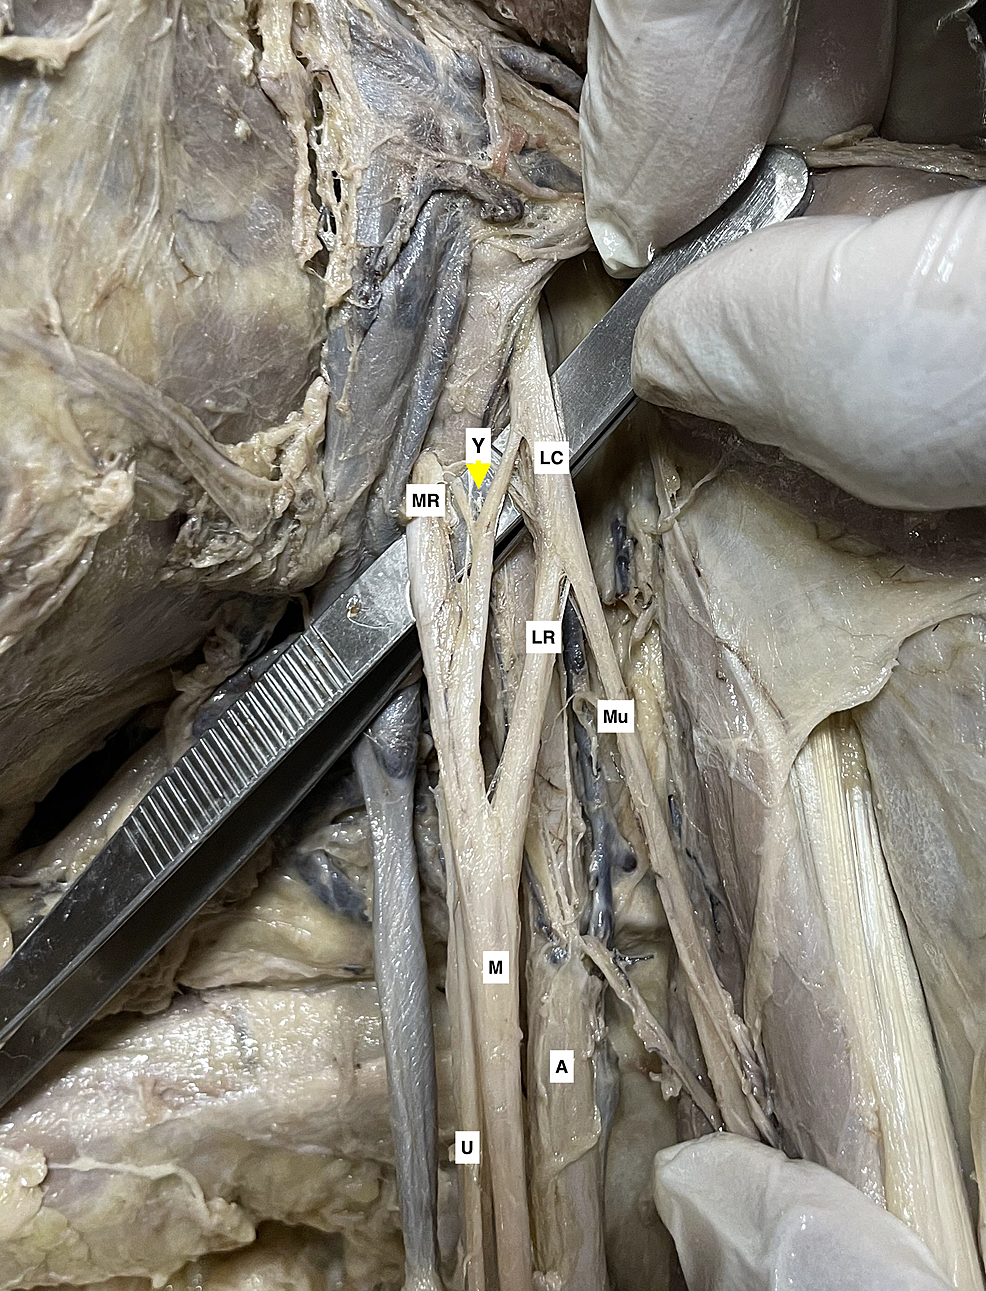 -A-cadaveric-specimen-of-left-axilla-with-brachial-plexus-showing-a-"Y"-shaped-supernumerary-root-(yellow-arrowhead),-arising-from-the-lateral-cord-(LC)-and-the-medial-root-(MR)-of-the-median-nerve-(M).-The-axillary-artery-(A),-lateral-root-(LR)-of-the-median-nerve,-musculocutaneous-nerve-(Mu),-and-ulnar-nerve-(U)-can-be-seen-in-the-adjacent-region.